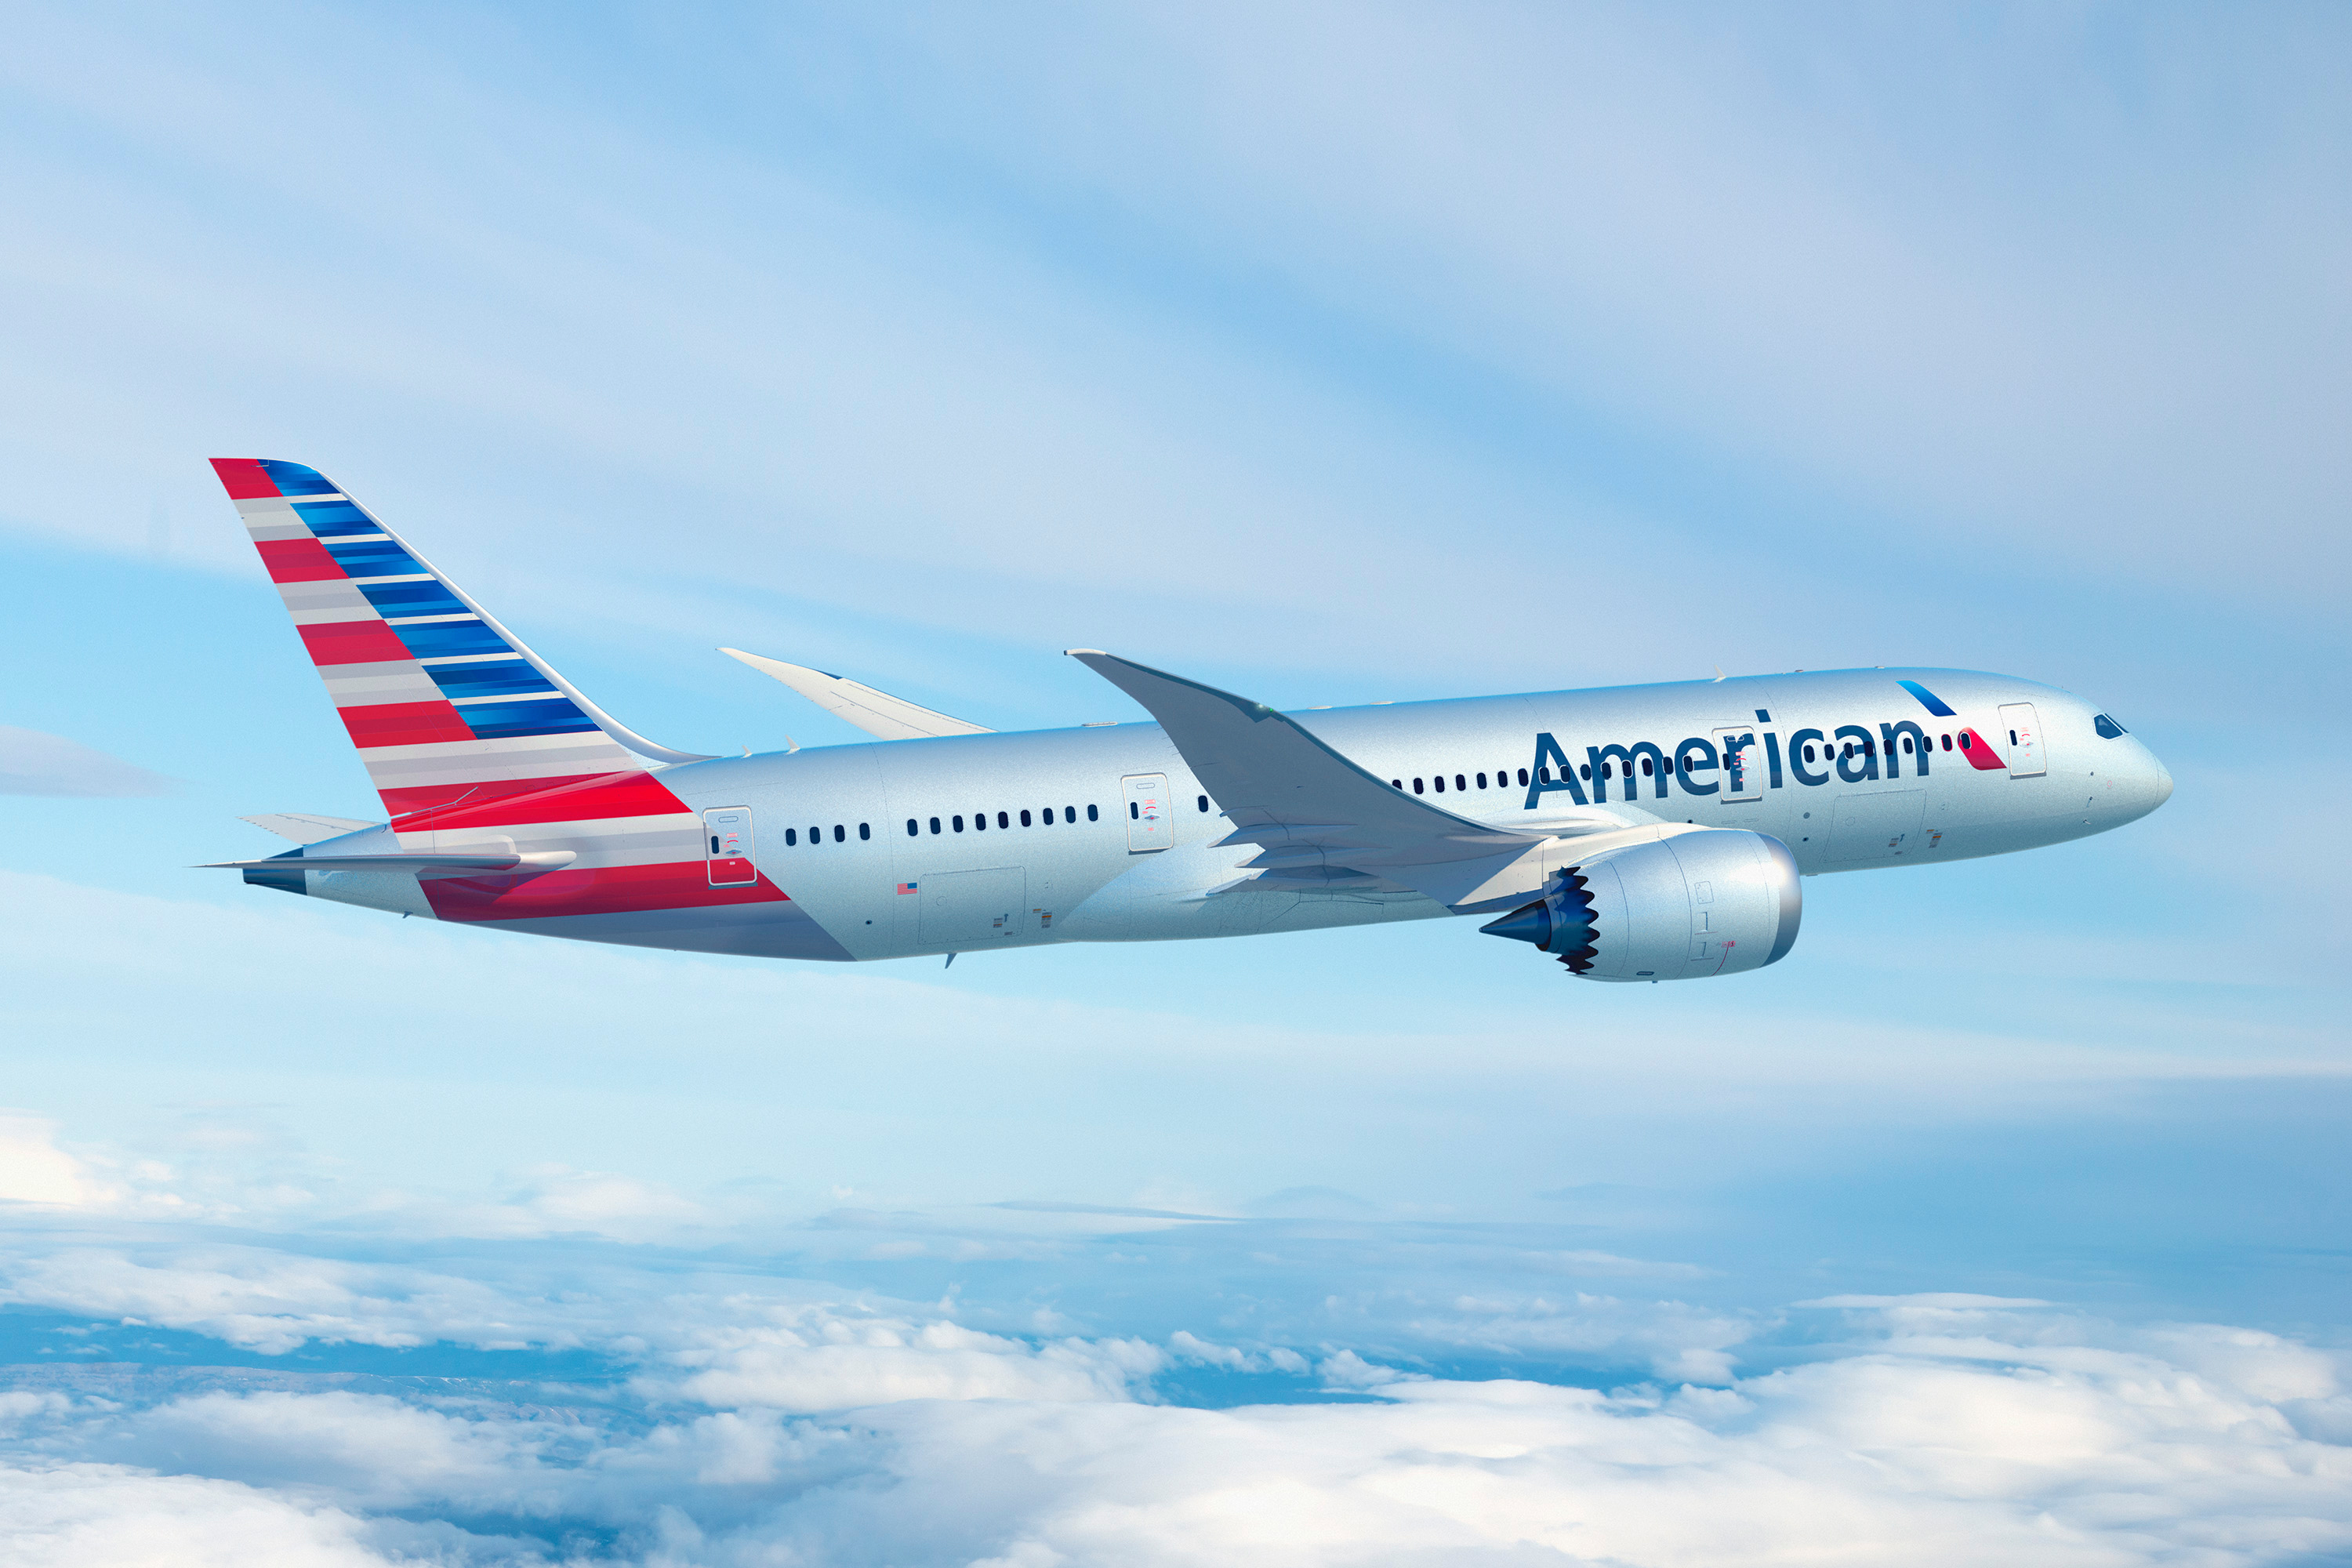 American Airlines Confirmed To News 95 7 On Thursday They Are Cutting 